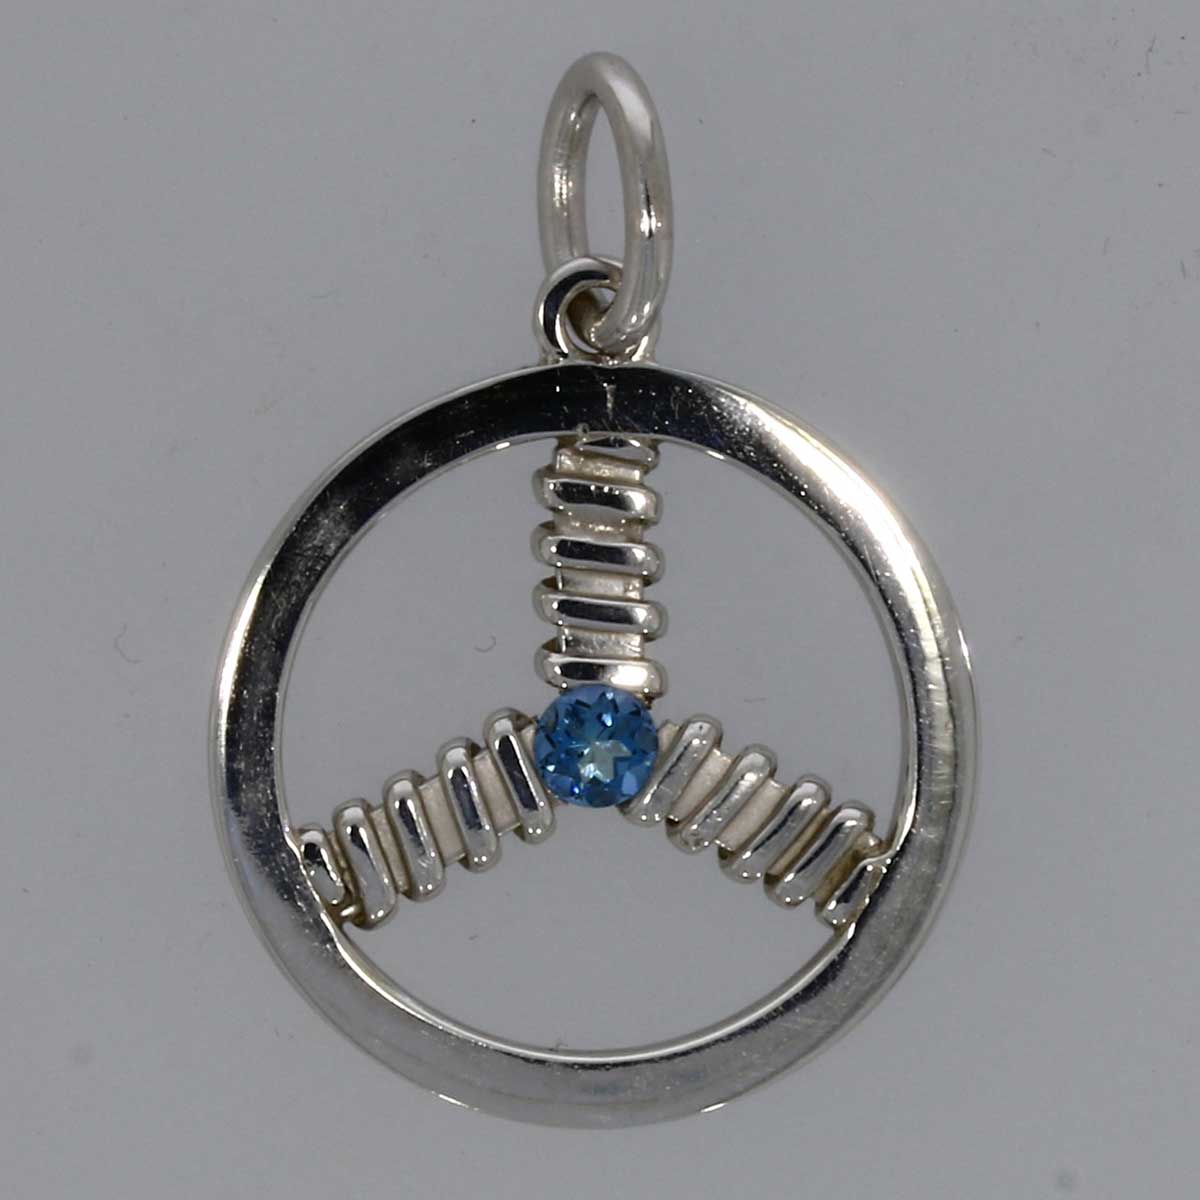 A sterling silver pendant with aquamarine gem.